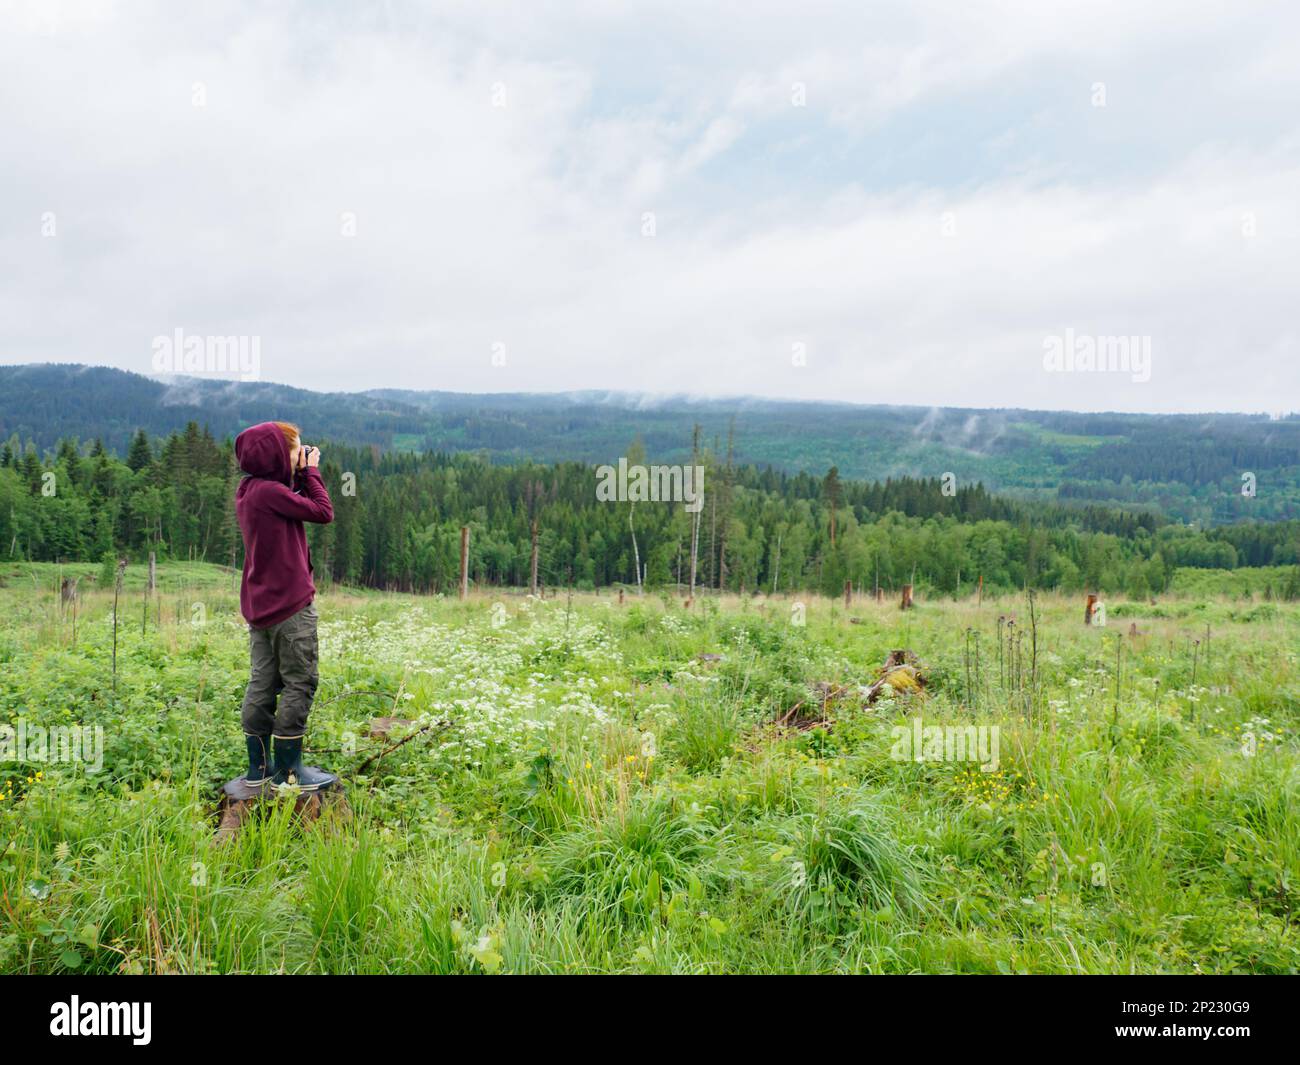 Axland, Sweden - June 2021: Tourist on the Swedish trekking routes during the rainy day. Northern Europe Stock Photo